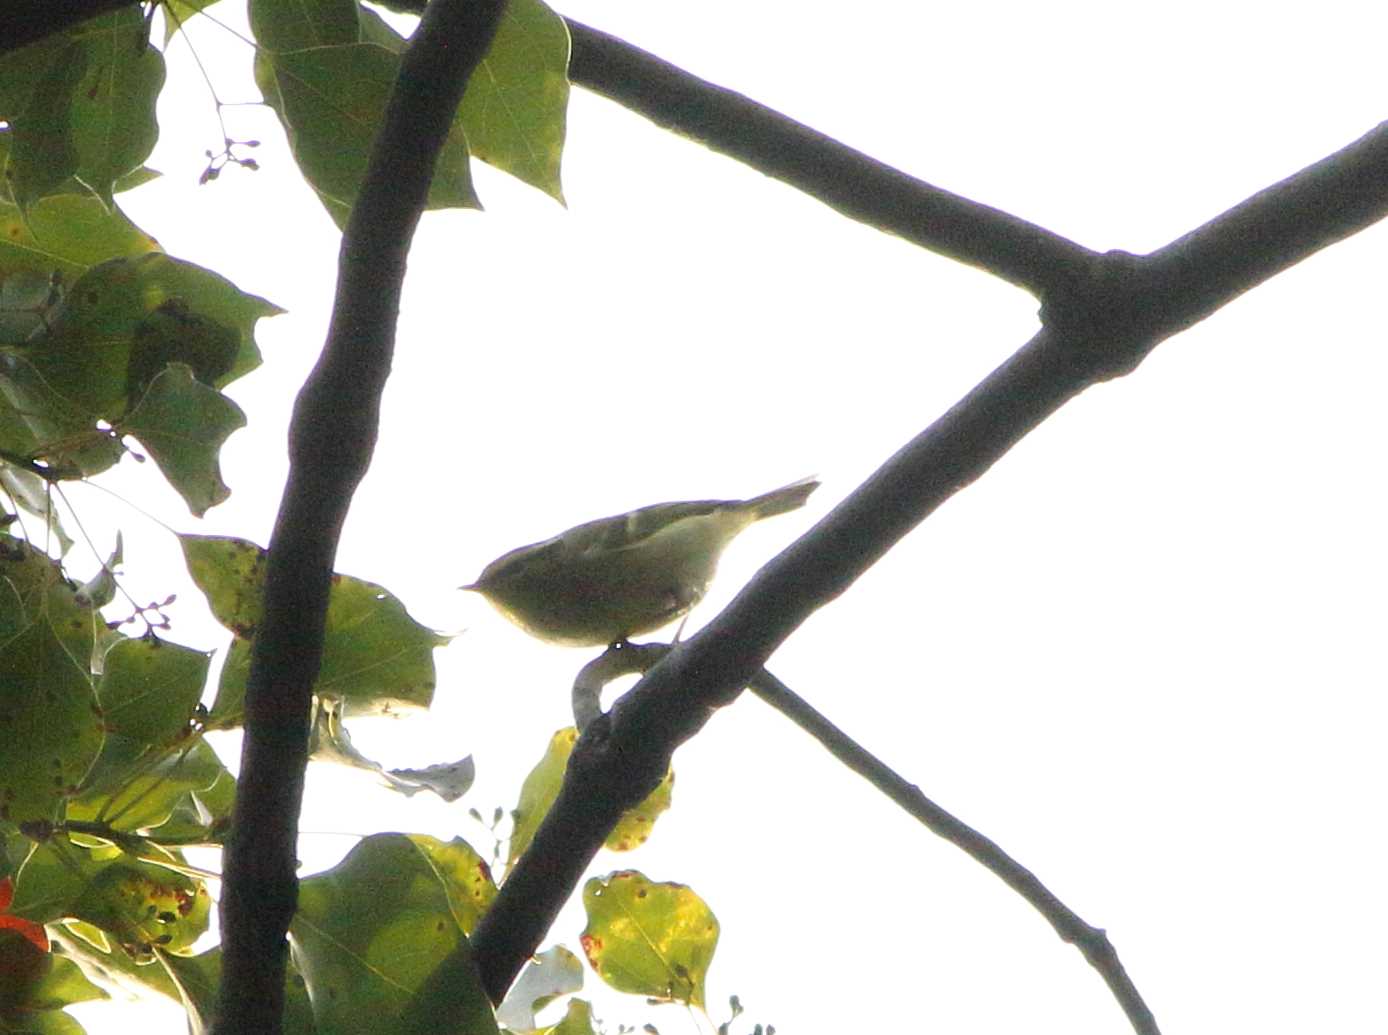 Photo of Pallas's Leaf Warbler at 和田堀公園 by マイク